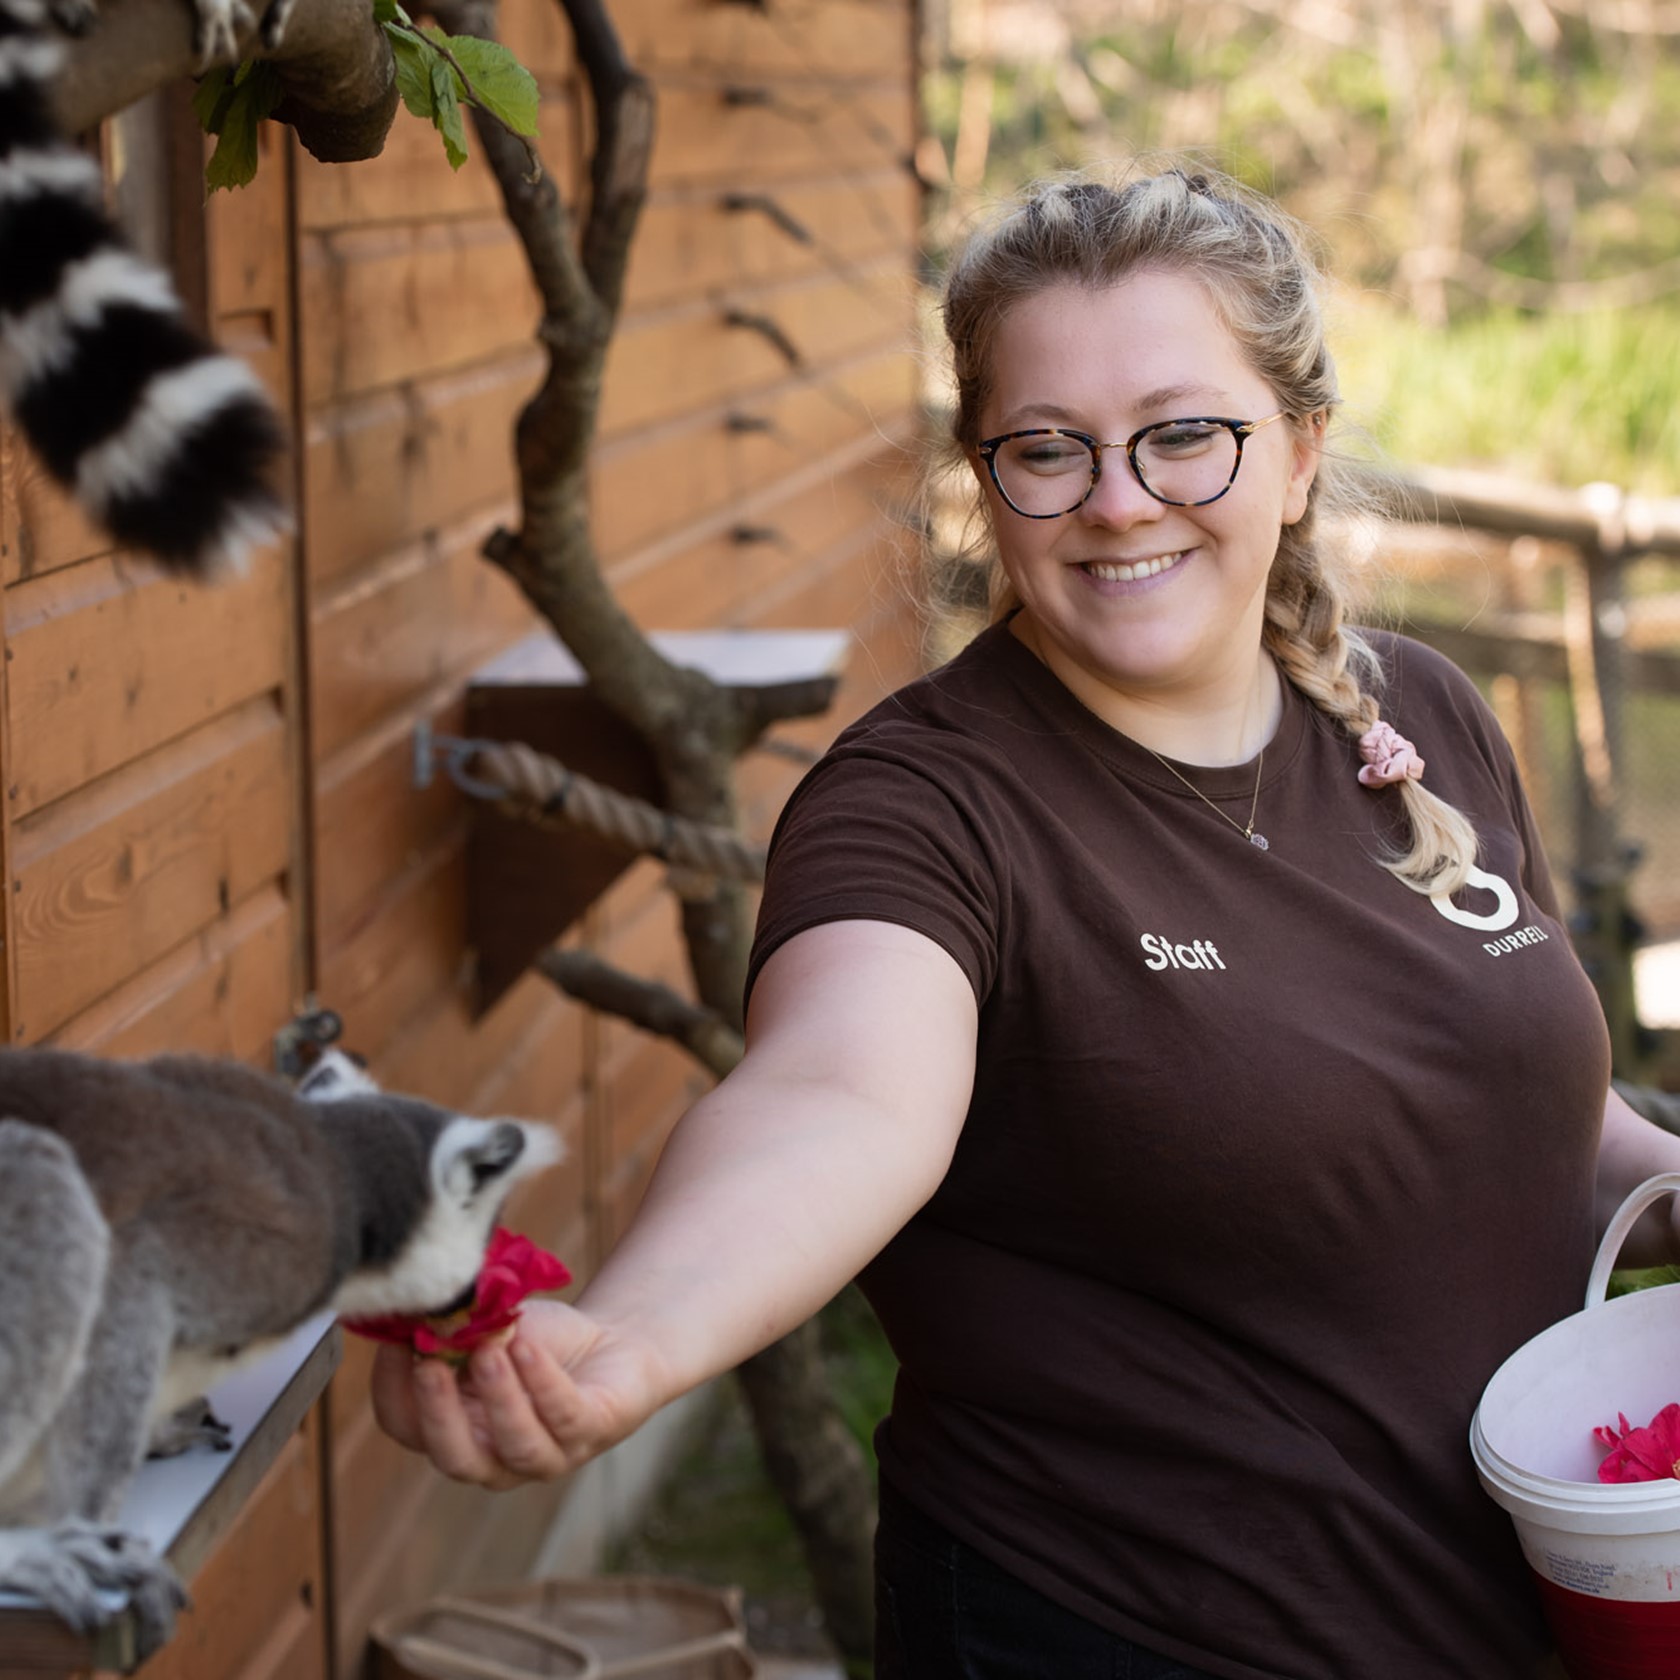 Zoo keeper at Jersey Zoo hand feeds a ring-tailed lemur